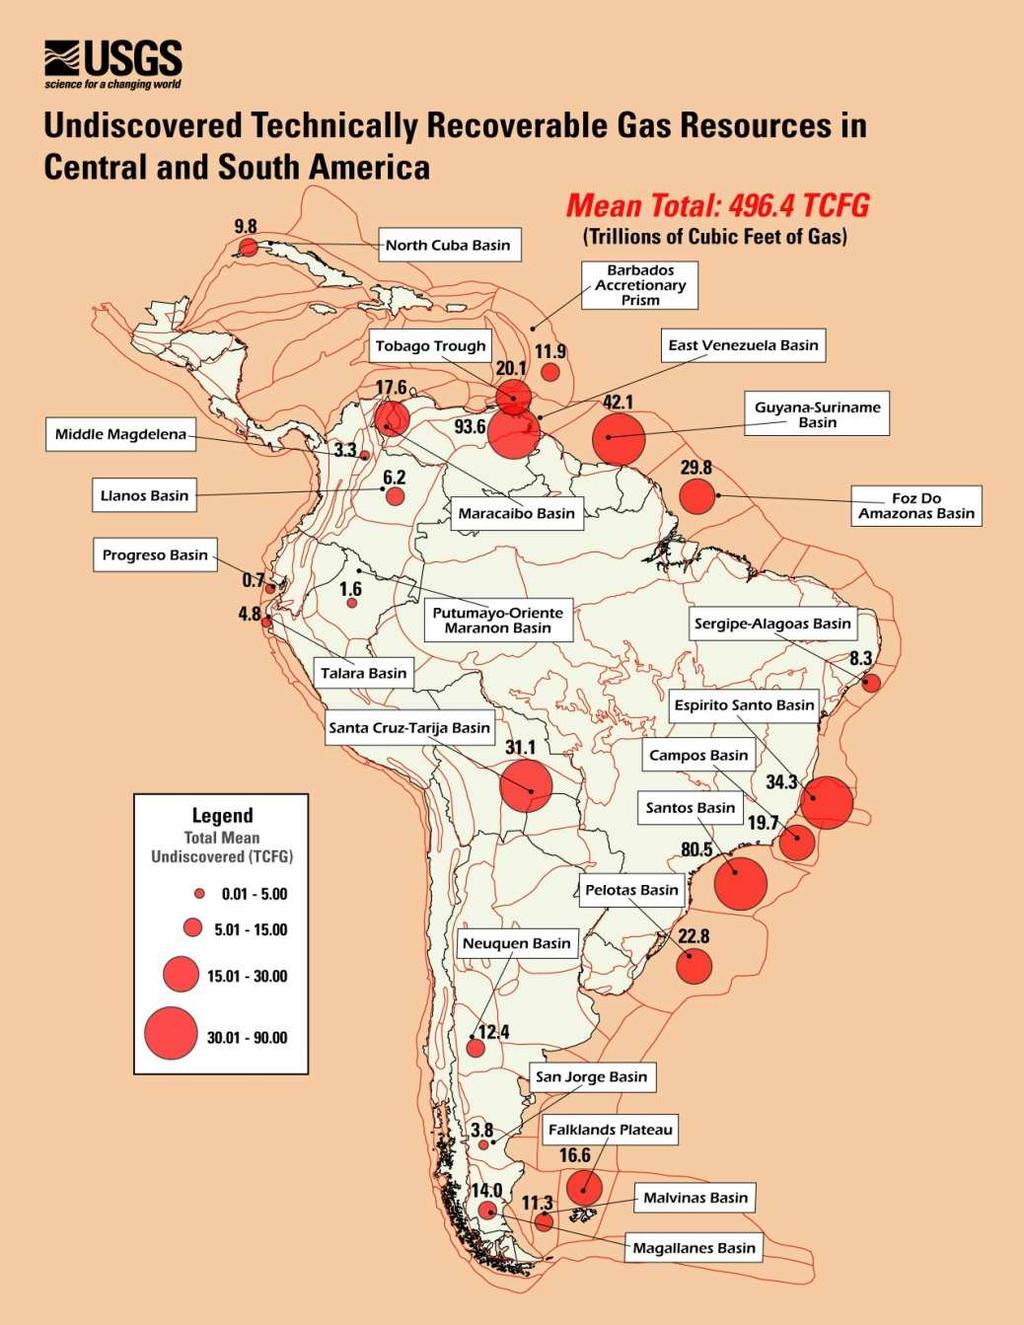 Gas 8% of Undiscovered Potential of Latin America 42 TCF of Gas